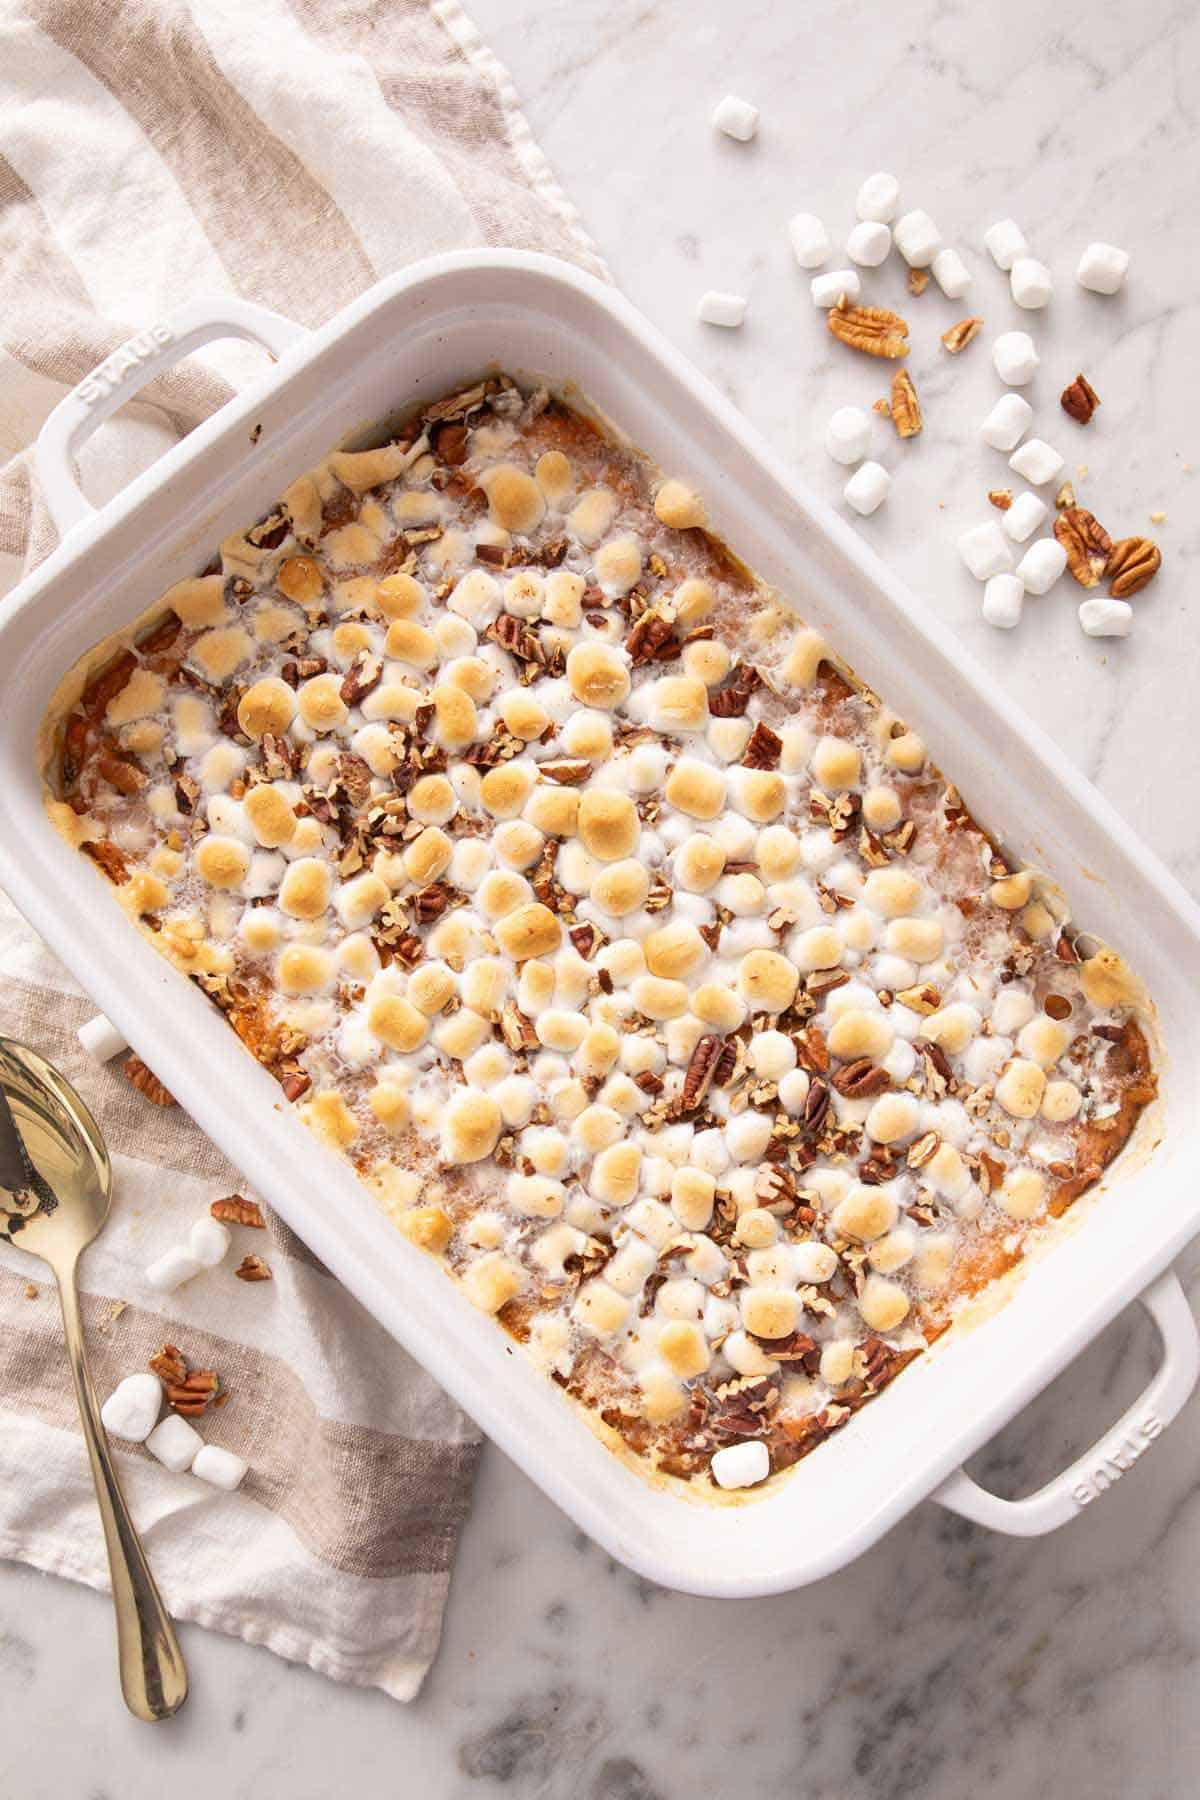 An overhead view of a baking dish of sweet potato casserole with marshmallows and pecans scattered around with a linen and spoon beside it.